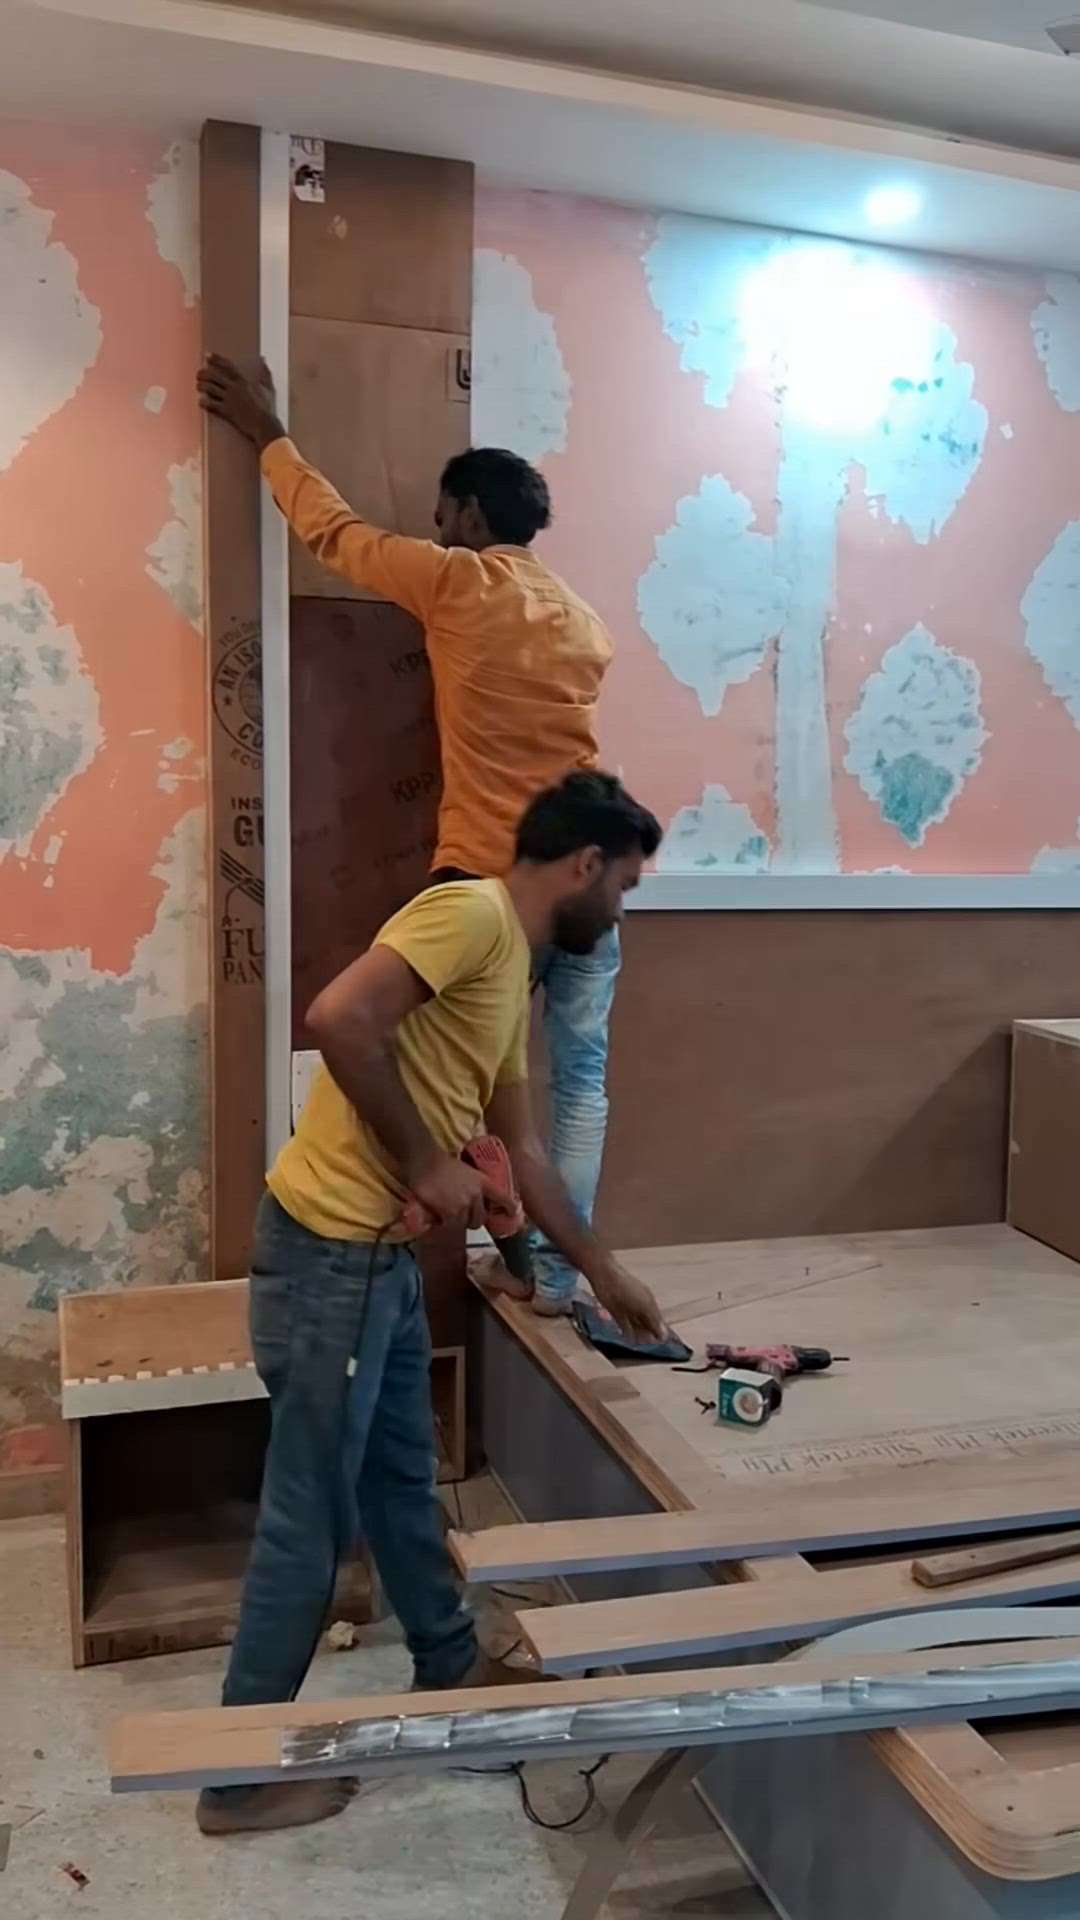 (𝗖𝗮𝗹𝗹 /𝗪𝗵𝗮𝘁𝘀𝗔𝗽𝗽)👉   099272 88882 
I WORK 𝐨𝐧y in 𝐋𝐚𝐛𝐨𝐮𝐫 SQFT, 𝐌𝐚𝐭𝐞𝐫𝐢𝐚𝐥 𝐬𝐡𝐨𝐮𝐥𝐝 𝐛𝐞 𝐩𝐫𝐨𝐯𝐢𝐝𝐞 𝐛𝐲 𝐨𝐰𝐧𝐞𝐫 I Work ALL KERALA 👇
Commercial and residential interiors i do.
𝐦𝐨𝐝𝐮𝐥𝐚𝐫  𝐤𝐢𝐭𝐜𝐡𝐞𝐧, 𝐰𝐚𝐫𝐝𝐫𝐨𝐛𝐞𝐬, 𝐜𝐨𝐭𝐬, 𝐒𝐭𝐮𝐝𝐲 𝐭𝐚𝐛𝐥𝐞, 𝐃𝐫𝐞𝐬𝐬𝐢𝐧𝐠 𝐭𝐚𝐛𝐥𝐞, 𝐓𝐕 𝐮𝐧𝐢𝐭, 𝐏𝐞𝐫𝐠𝐨𝐥𝐚, 𝐏𝐚𝐧𝐞𝐥𝐥𝐢𝐧𝐠, 𝐂𝐫𝐨𝐜𝐤𝐞𝐫𝐲 𝐔𝐧𝐢𝐭, 𝐰𝐚𝐬𝐡𝐢𝐧𝐠 𝐛𝐚𝐬𝐢𝐧 𝐮𝐧𝐢𝐭, office table, Counter, Storage, Partition, Mica work plywood work
__________________________________
 ⭕𝐐𝐔𝐀𝐋𝐈𝐓𝐘 𝐈𝐒 𝐁𝐄𝐒𝐓 𝐅𝐎𝐑 𝐖𝐎𝐑𝐊
 ⭕ 𝐈 𝐰𝐨𝐫𝐤 𝐄𝐯𝐞𝐫𝐲 𝐖𝐡𝐞𝐫𝐞 𝐈𝐧 𝐊𝐞𝐫𝐚𝐥𝐚
 ⭕ 𝐋𝐚𝐧𝐠𝐮𝐚𝐠𝐞𝐬 𝐤𝐧𝐨𝐰𝐧 , 𝐌𝐚𝐥𝐚𝐲𝐚𝐥𝐚𝐦
 _________________________________
Material Name list i work in 👇
Plywood, mica, veeners, acrylic, multi wood HDMR, v board, MDF board , particle board, laminate, pvc, ceiling, etc. All kind interior work i do

#allkerala #Kerala #Interiors #work 
#Thiruvananthapuram (#Trivandrum)
 #Kollam (#Quilon) #